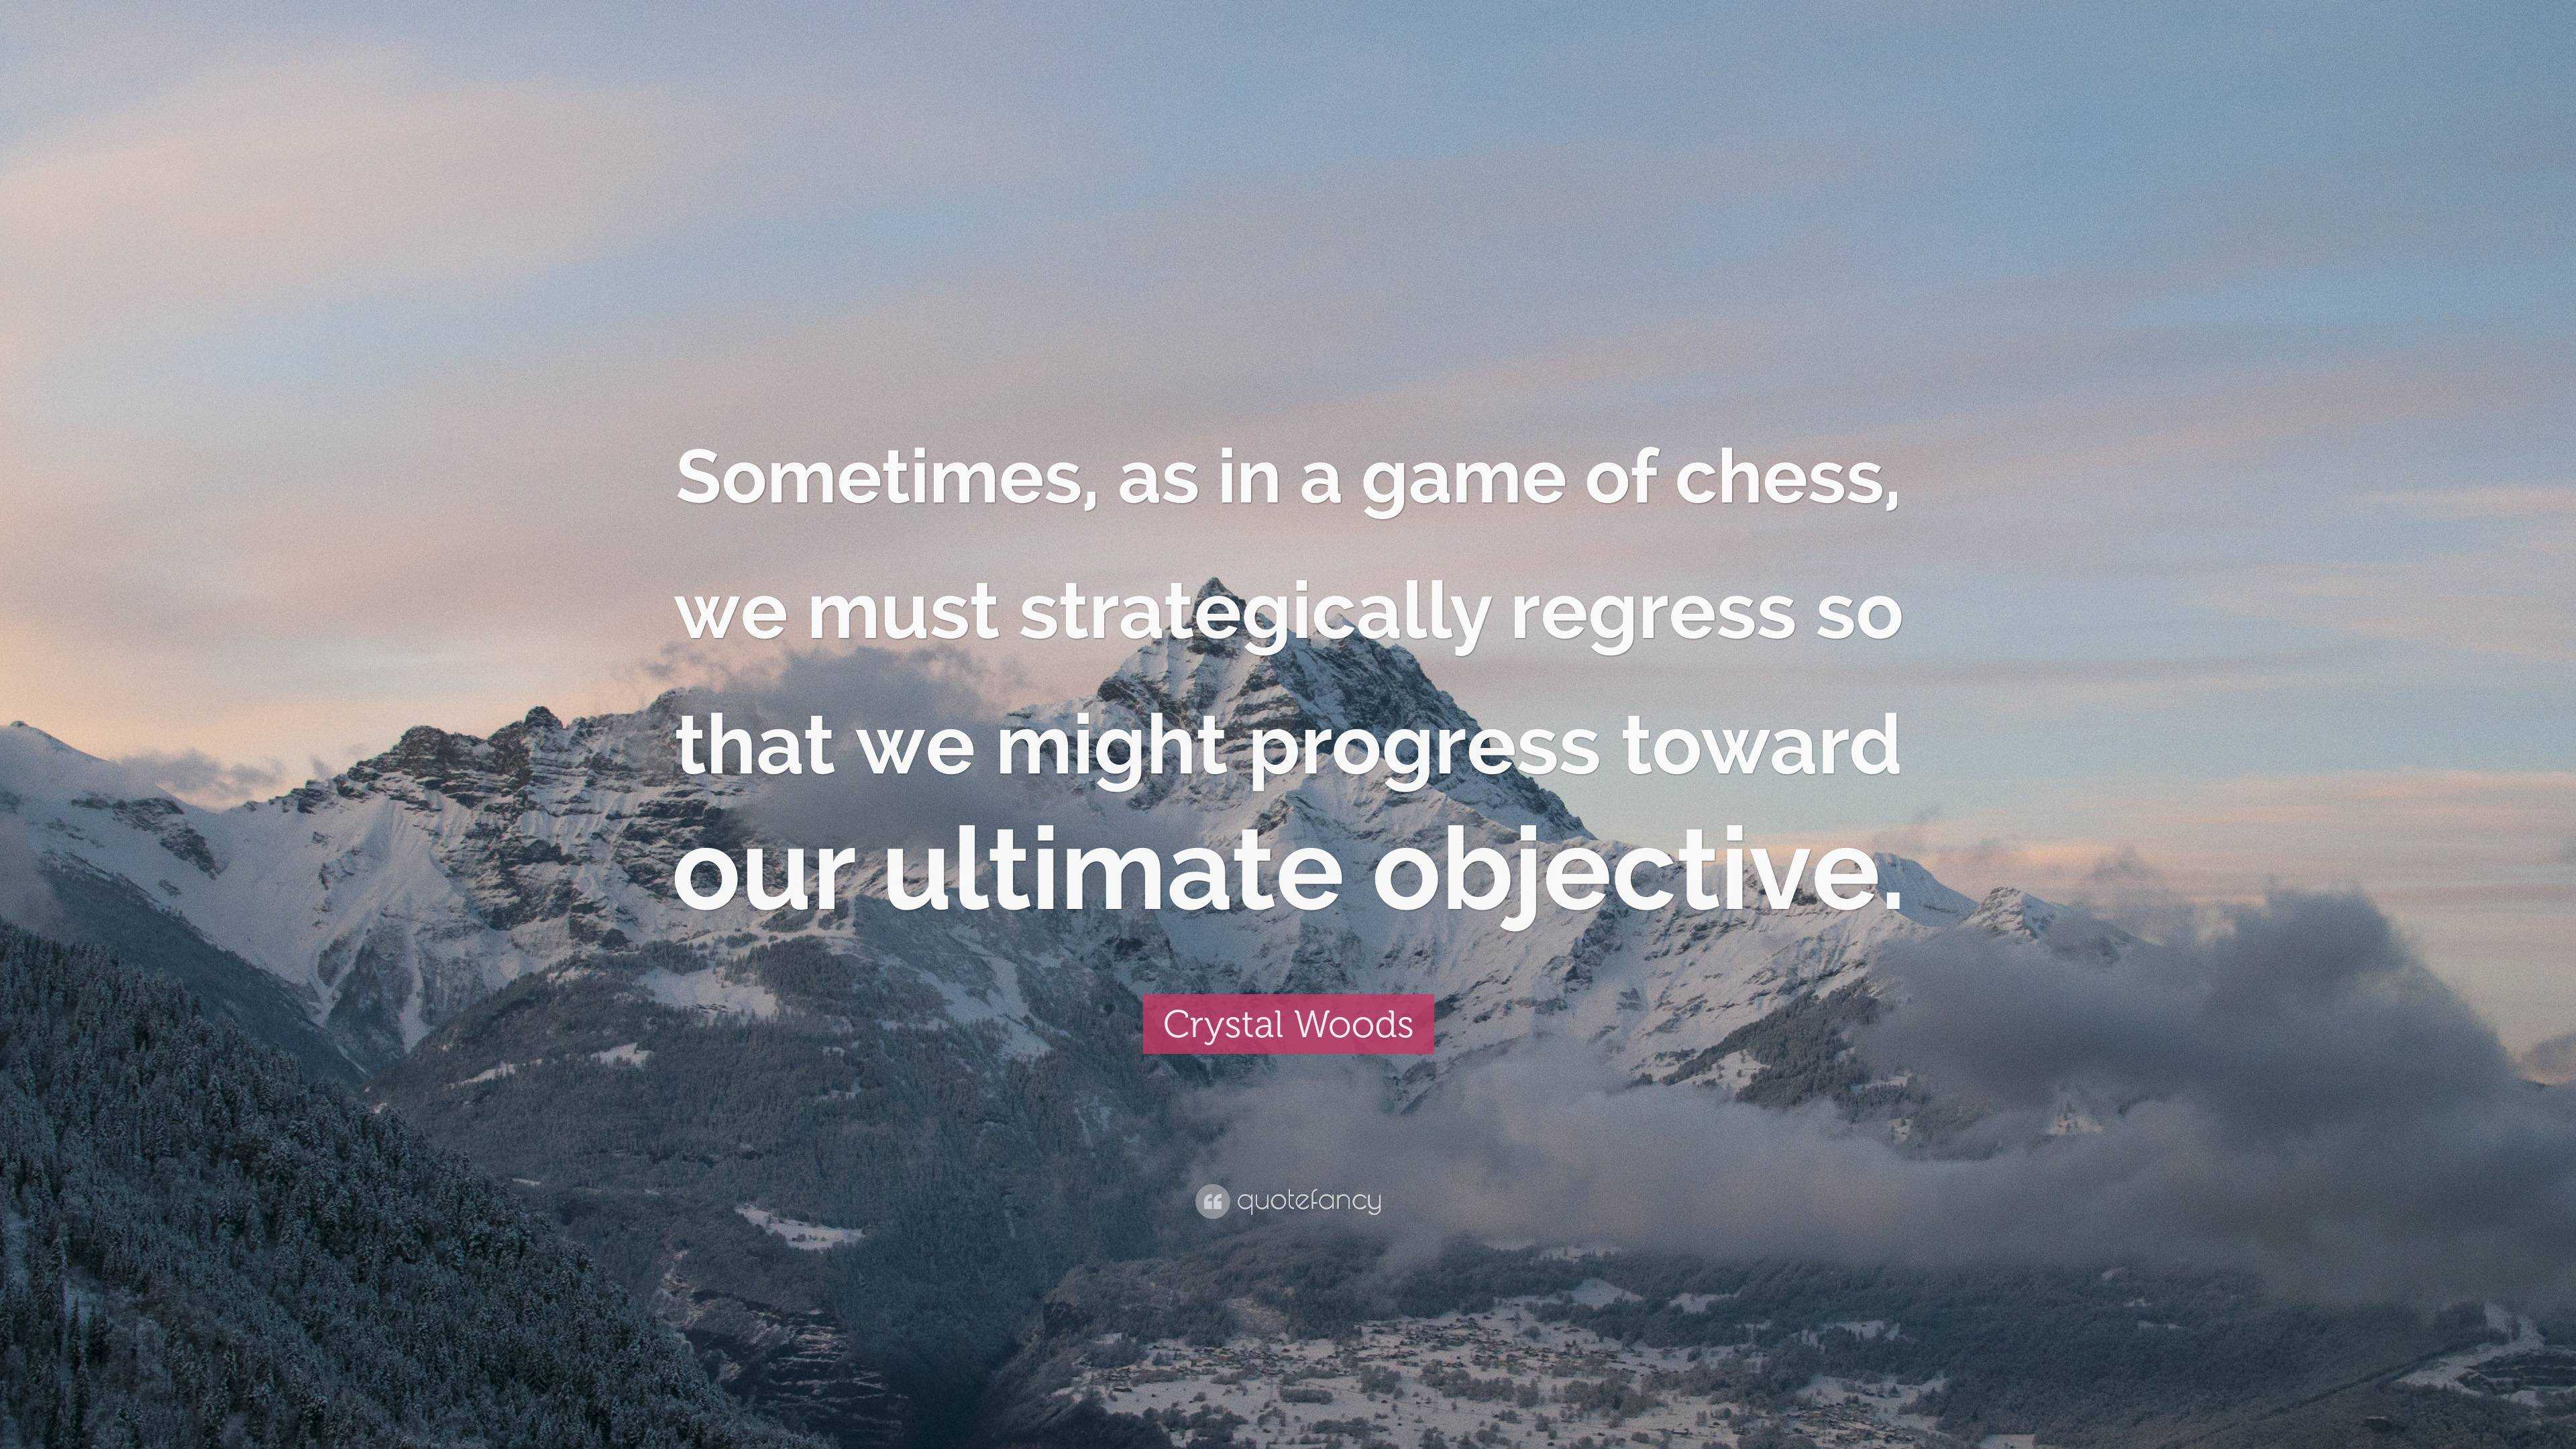 All warfare is based on timing There are more possible iterations of a game  of chess than there are atoms in the known universe. BB cotticiaknet -  iFunny Brazil